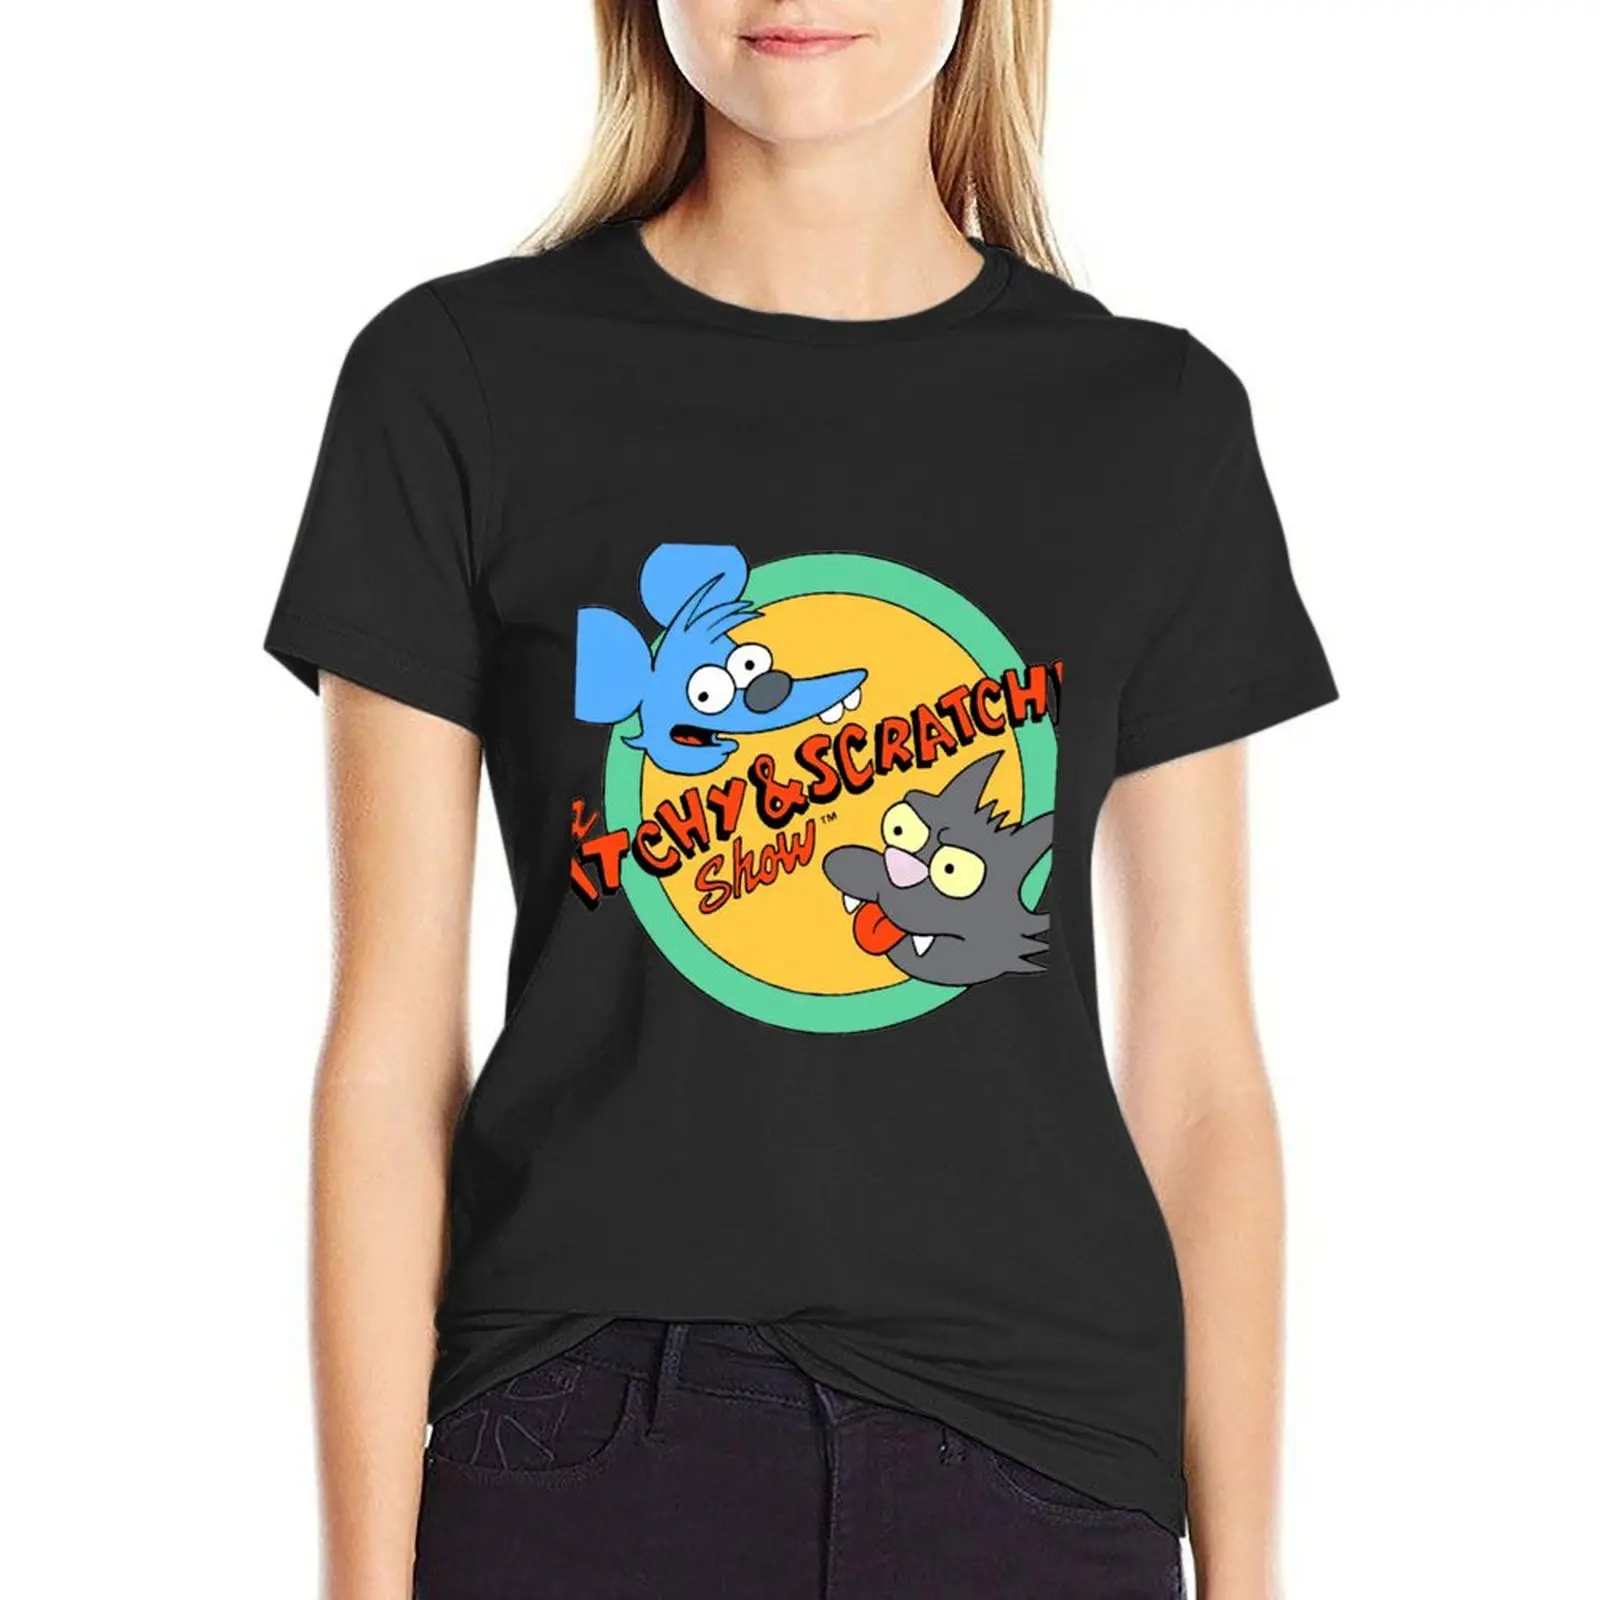 

The Itchy and scratchy Cartoons T-shirt Short sleeve tee graphics white t-shirts for Women